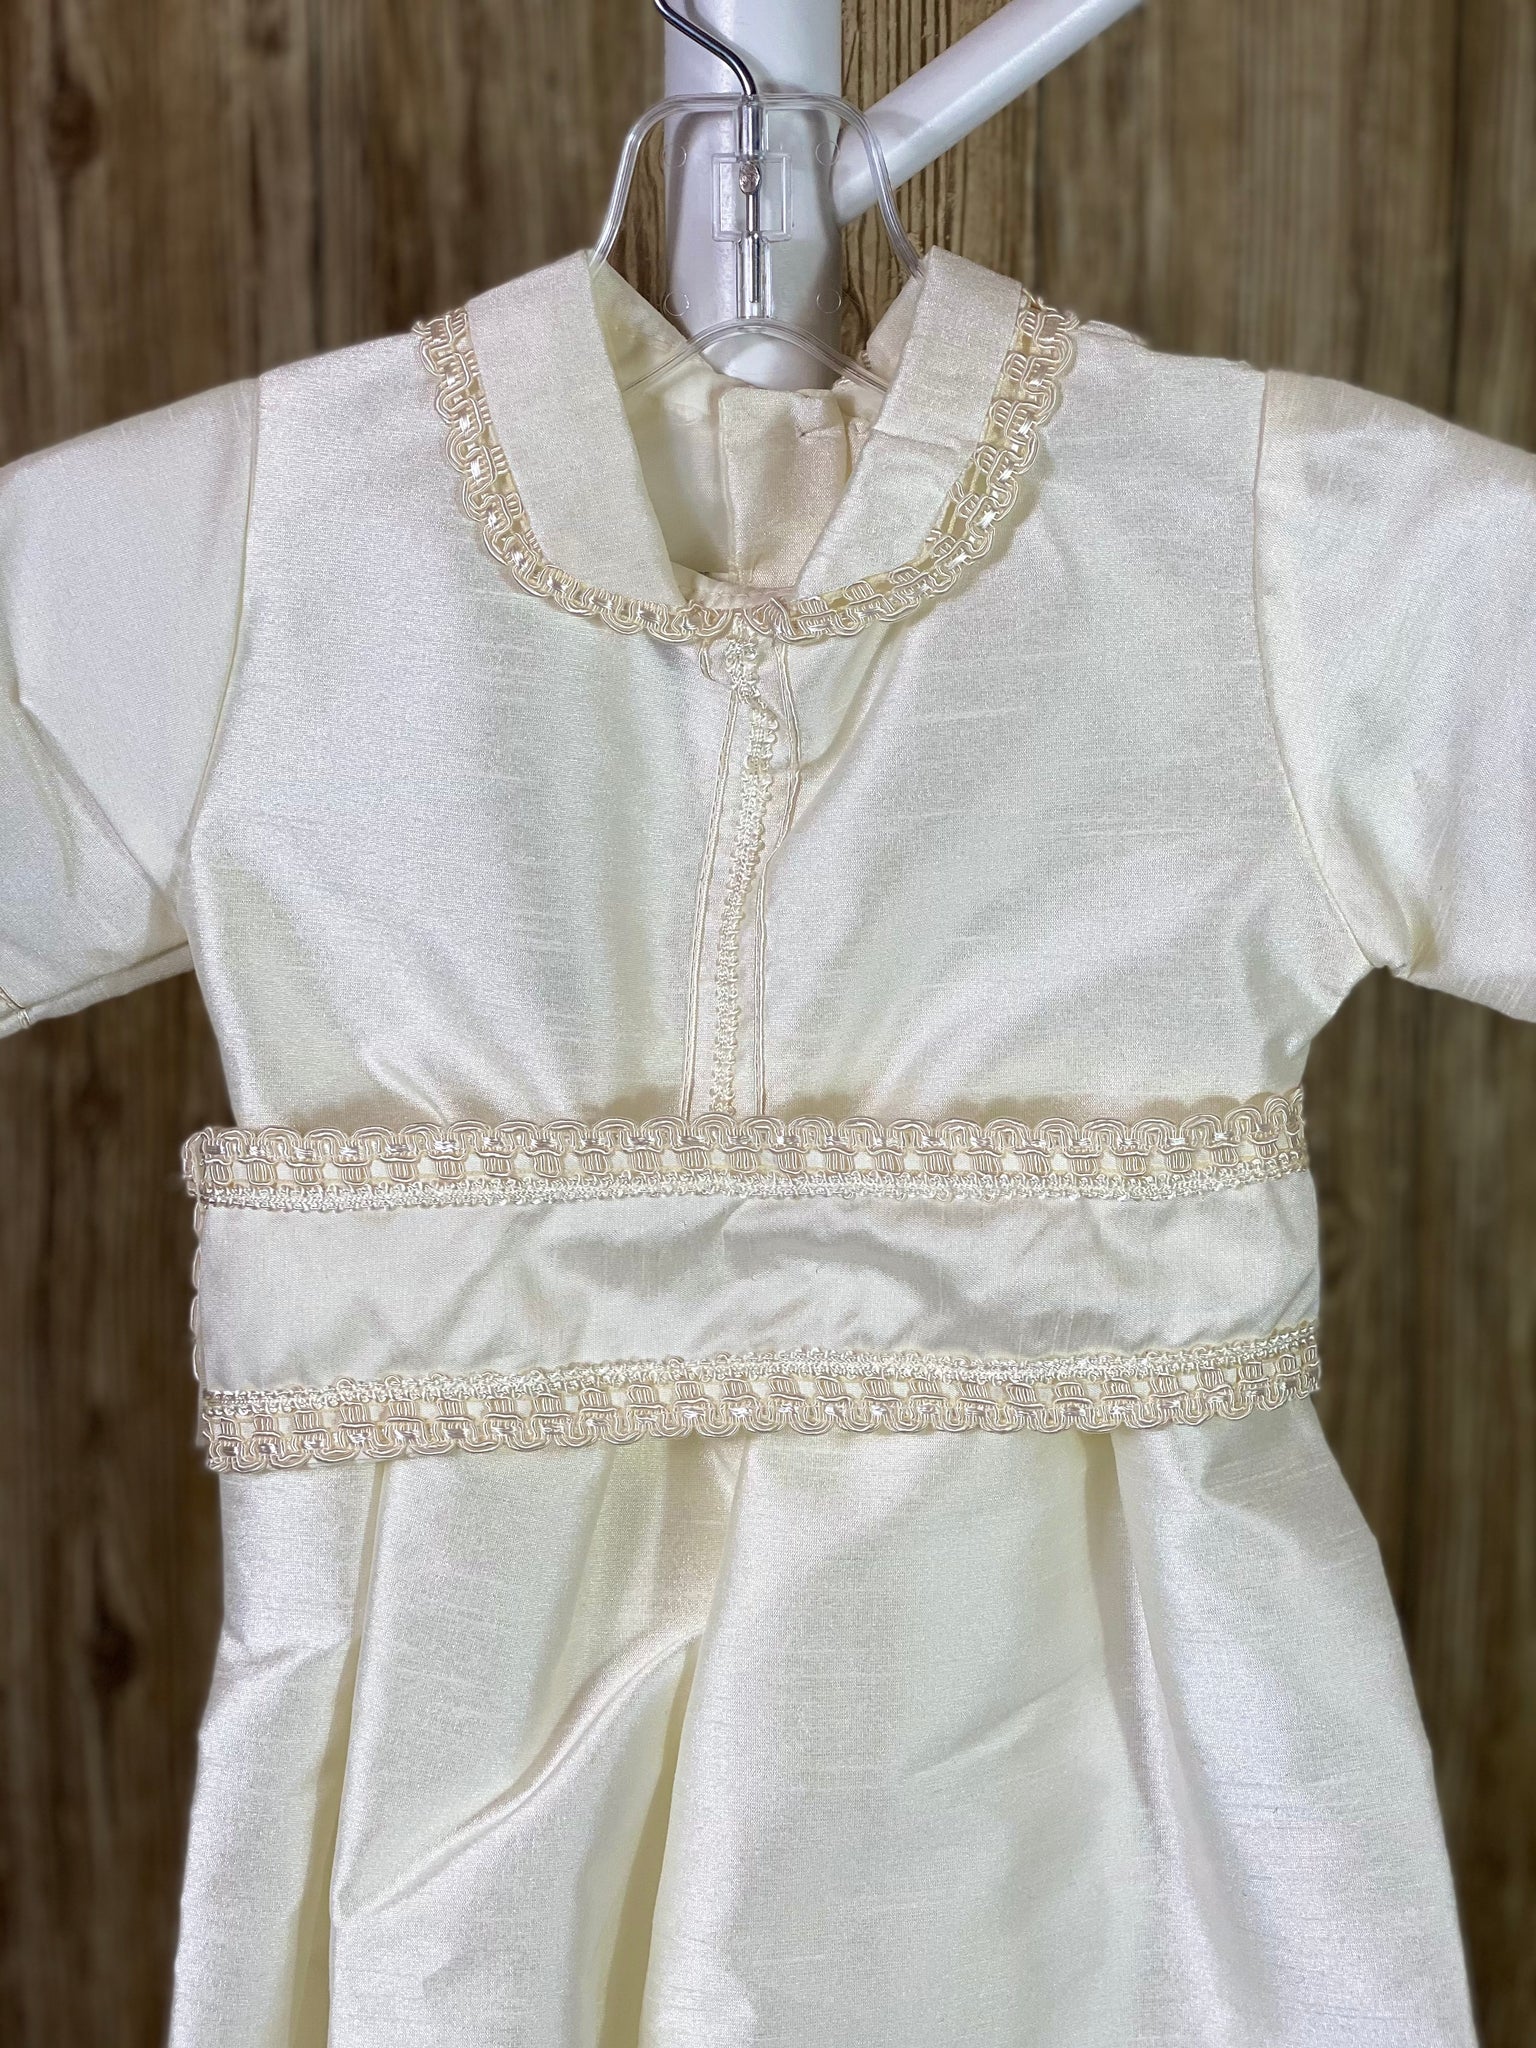 IVORY  4-piece ivory set including romper, belt, beret and mozzetta Collared with short sleeve Intricate braided trim lining belt and mozzetta edges Thin trim lining cuffs, beret, and bodice Button closure on back Rope closure on mozzetta